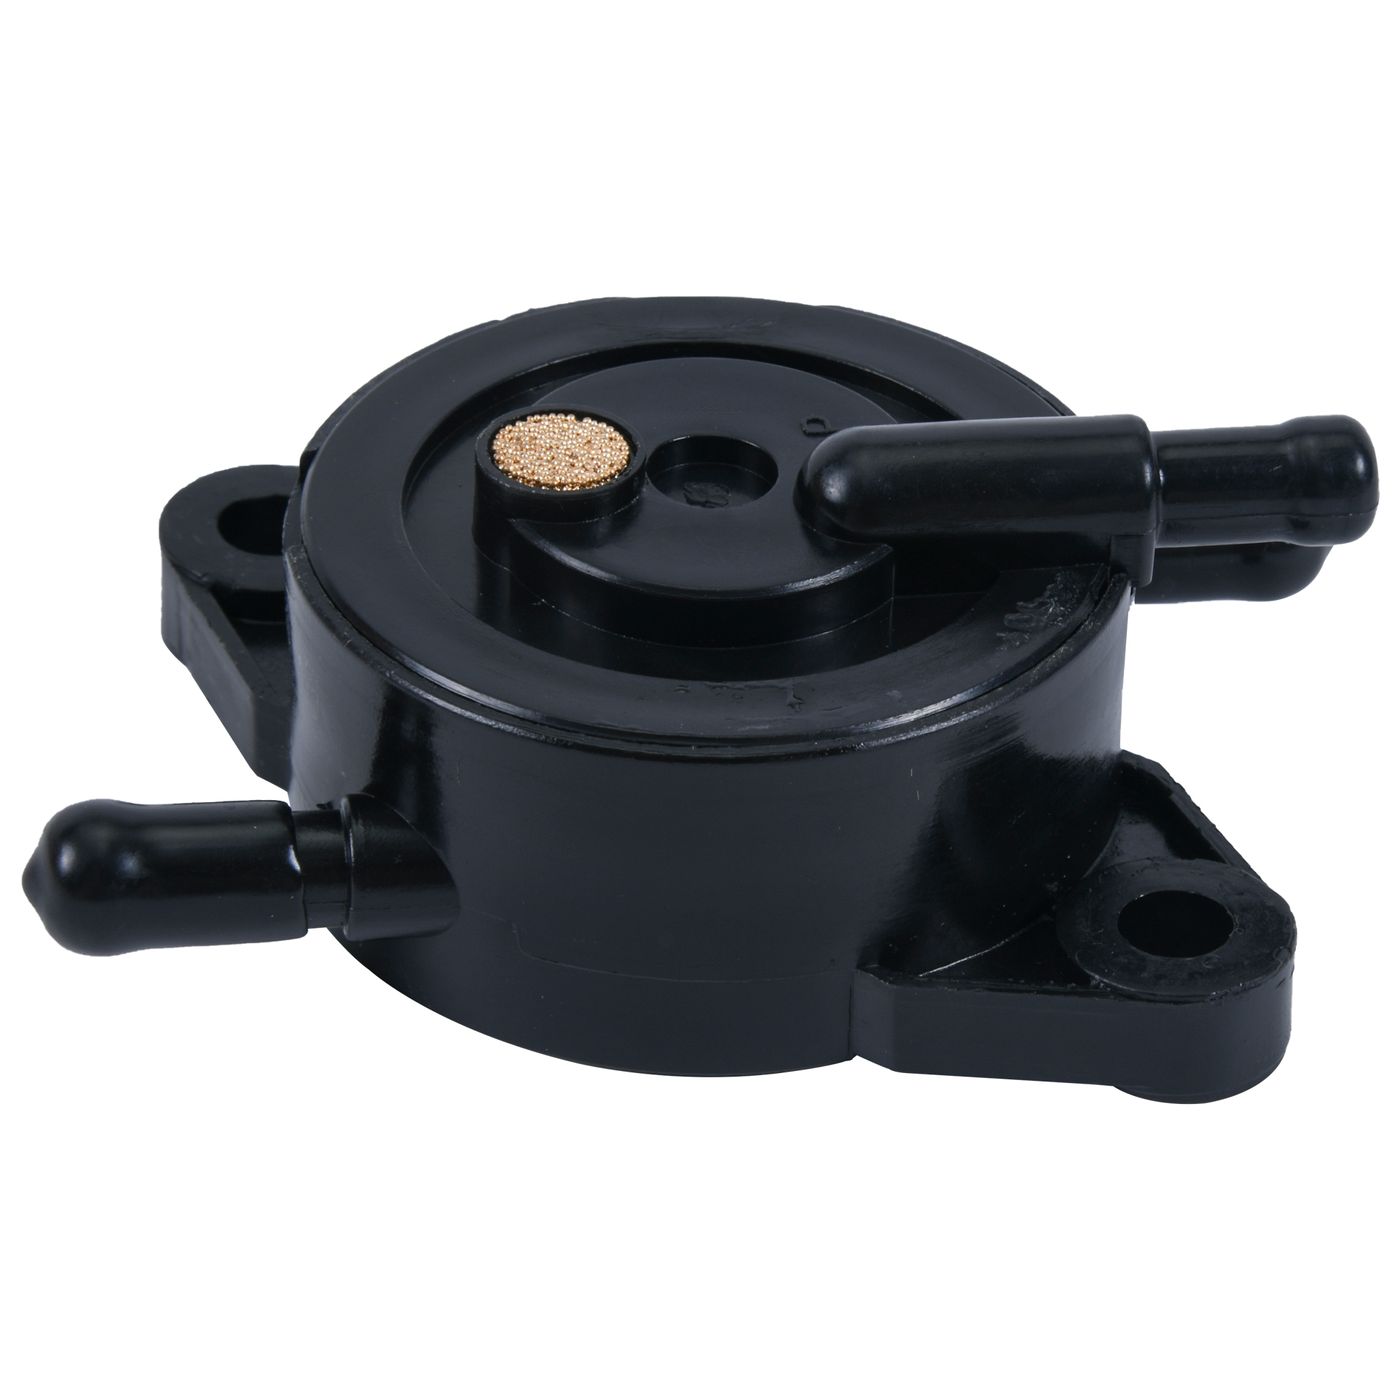 Wrp Fuel Pumps - WRP475007 image